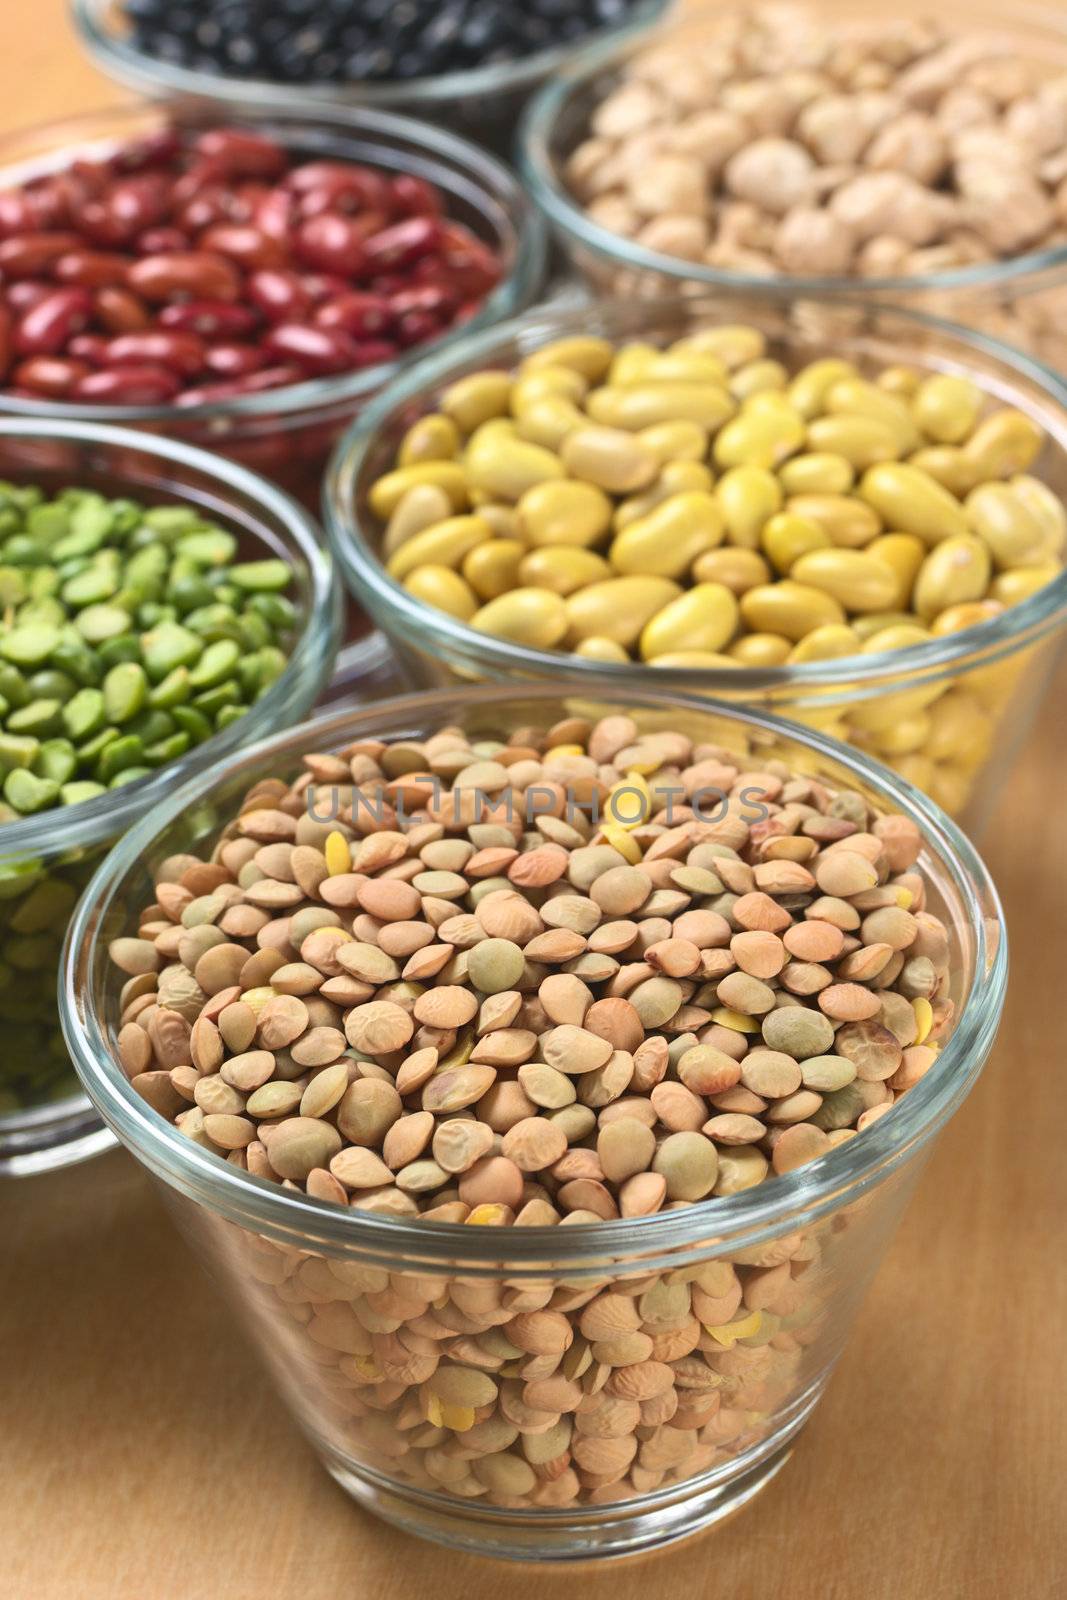 Lentils and other legumes (split peas, canary beans, kidney beans, chickpeas) in glass bowls (Selective Focus, Focus one third into the lentils) 